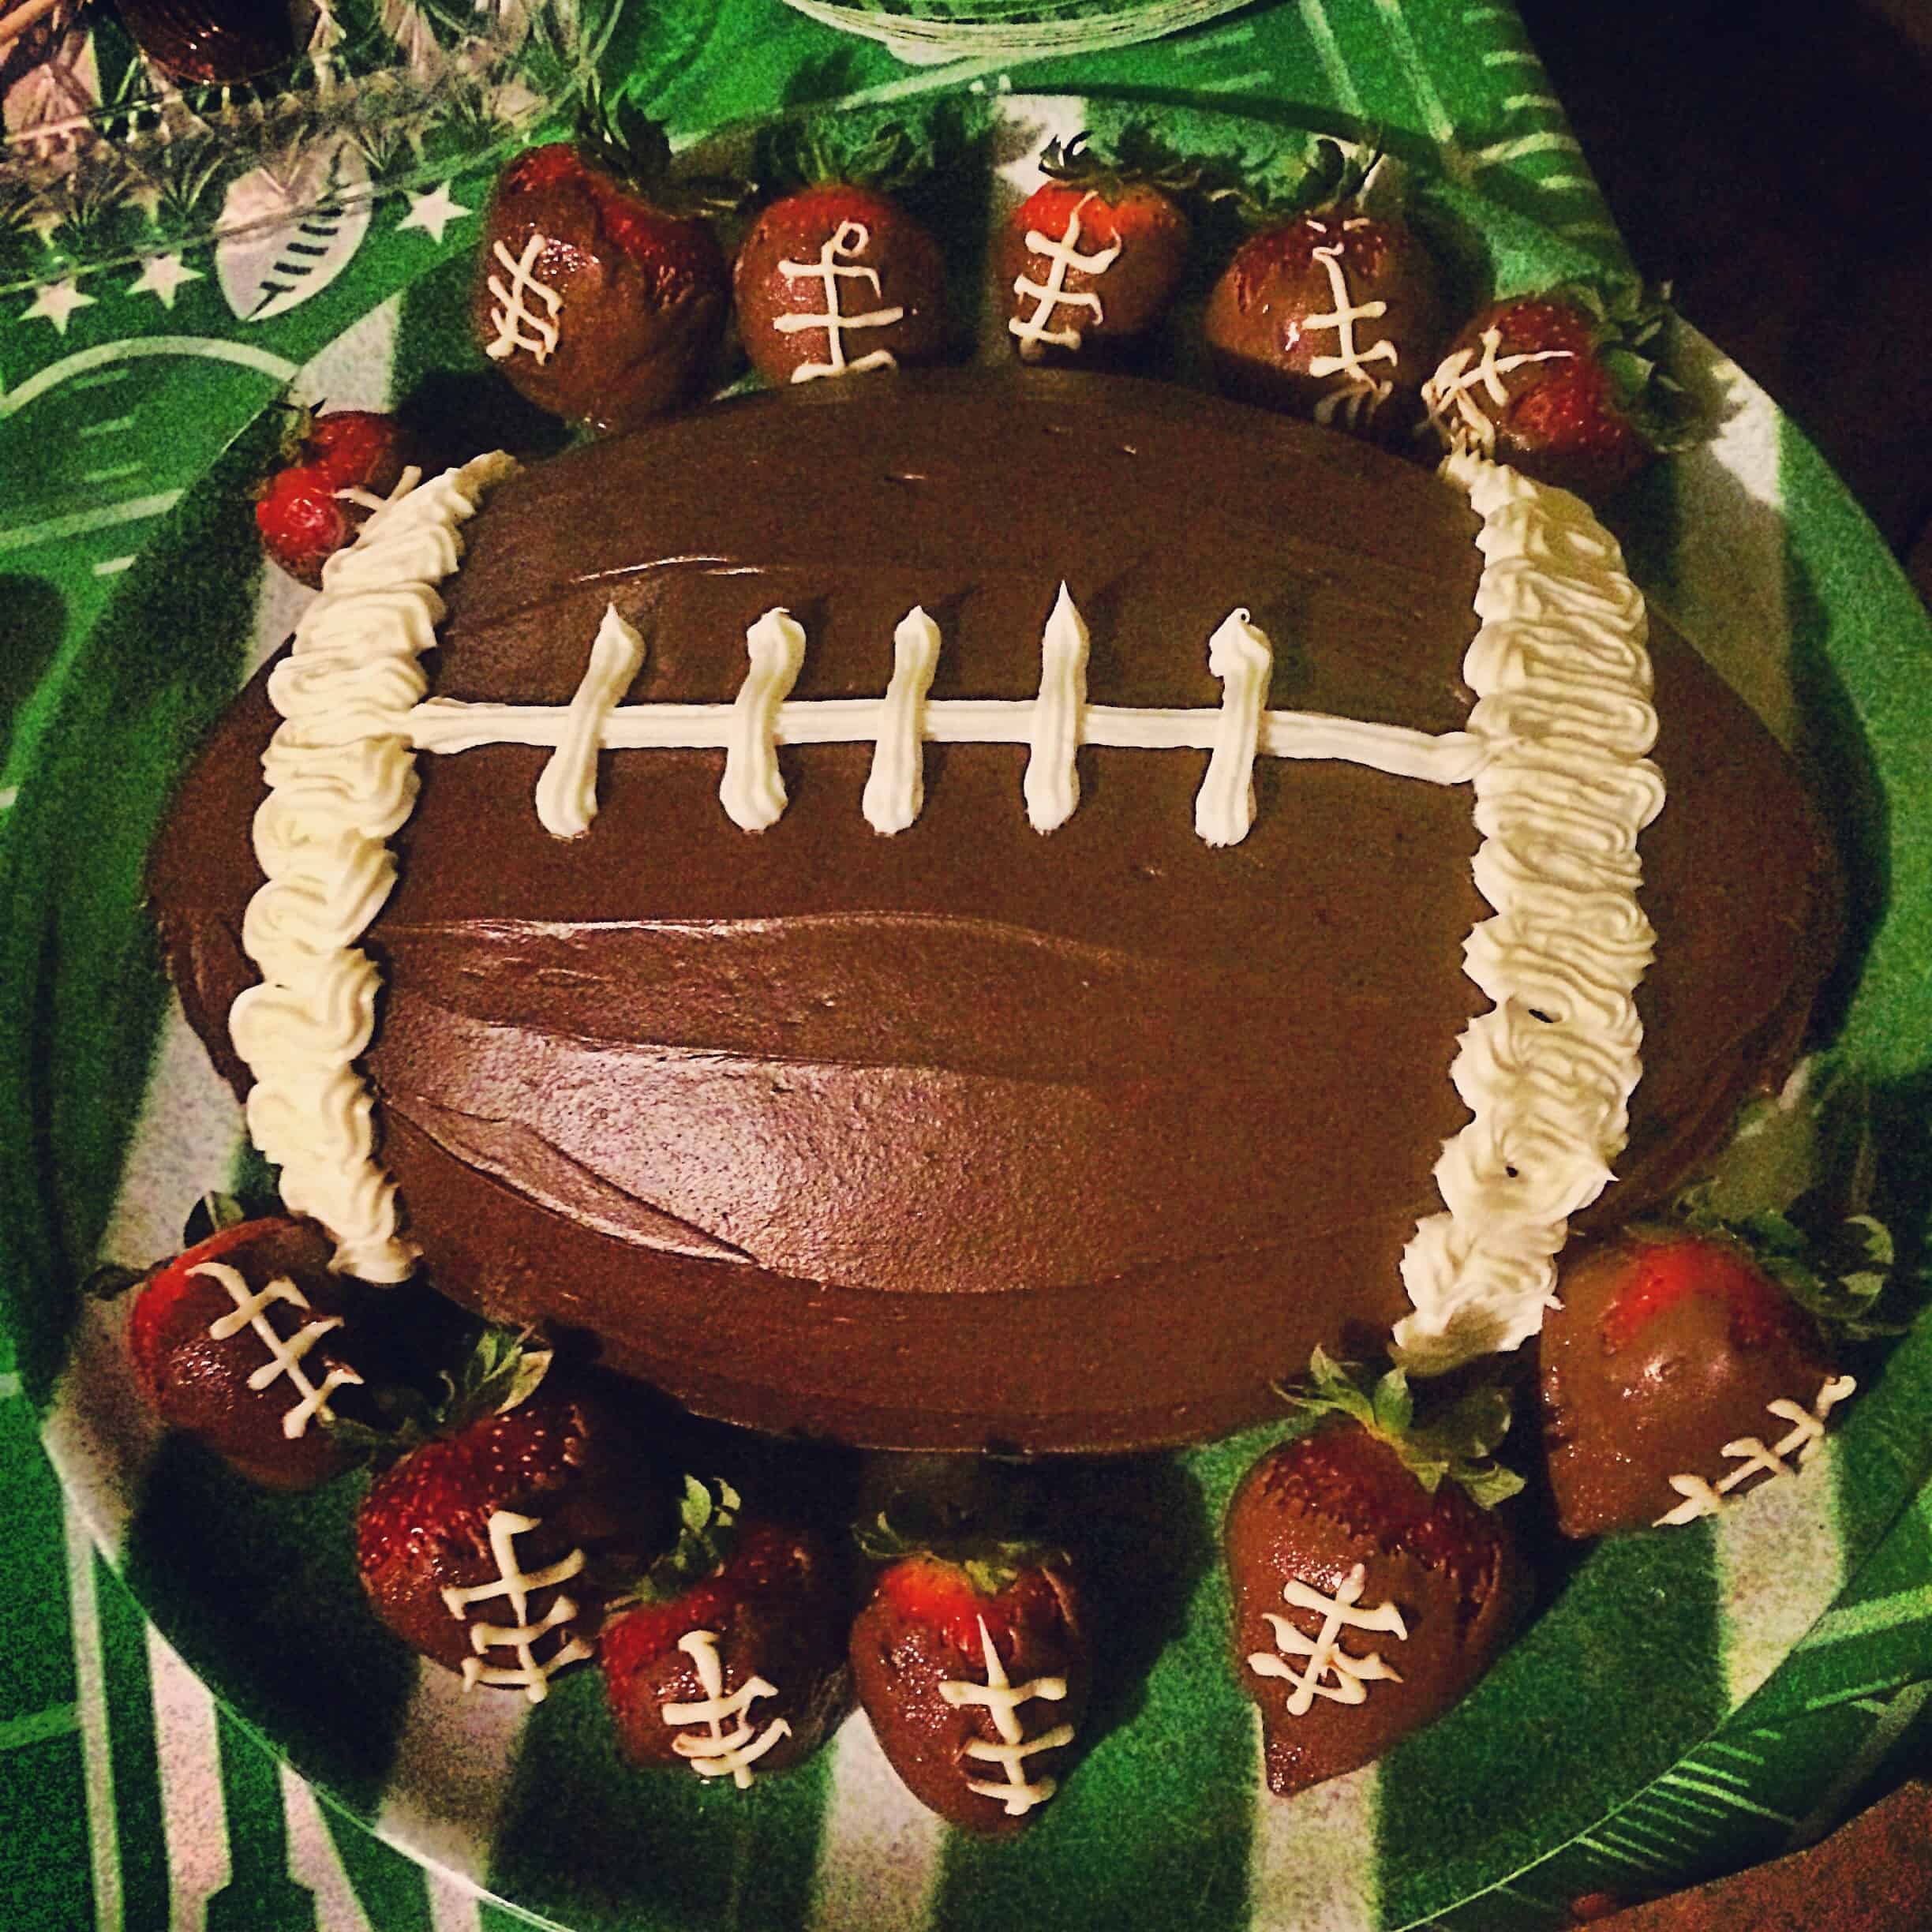 Football cake with chocolate covered foorball strawberries